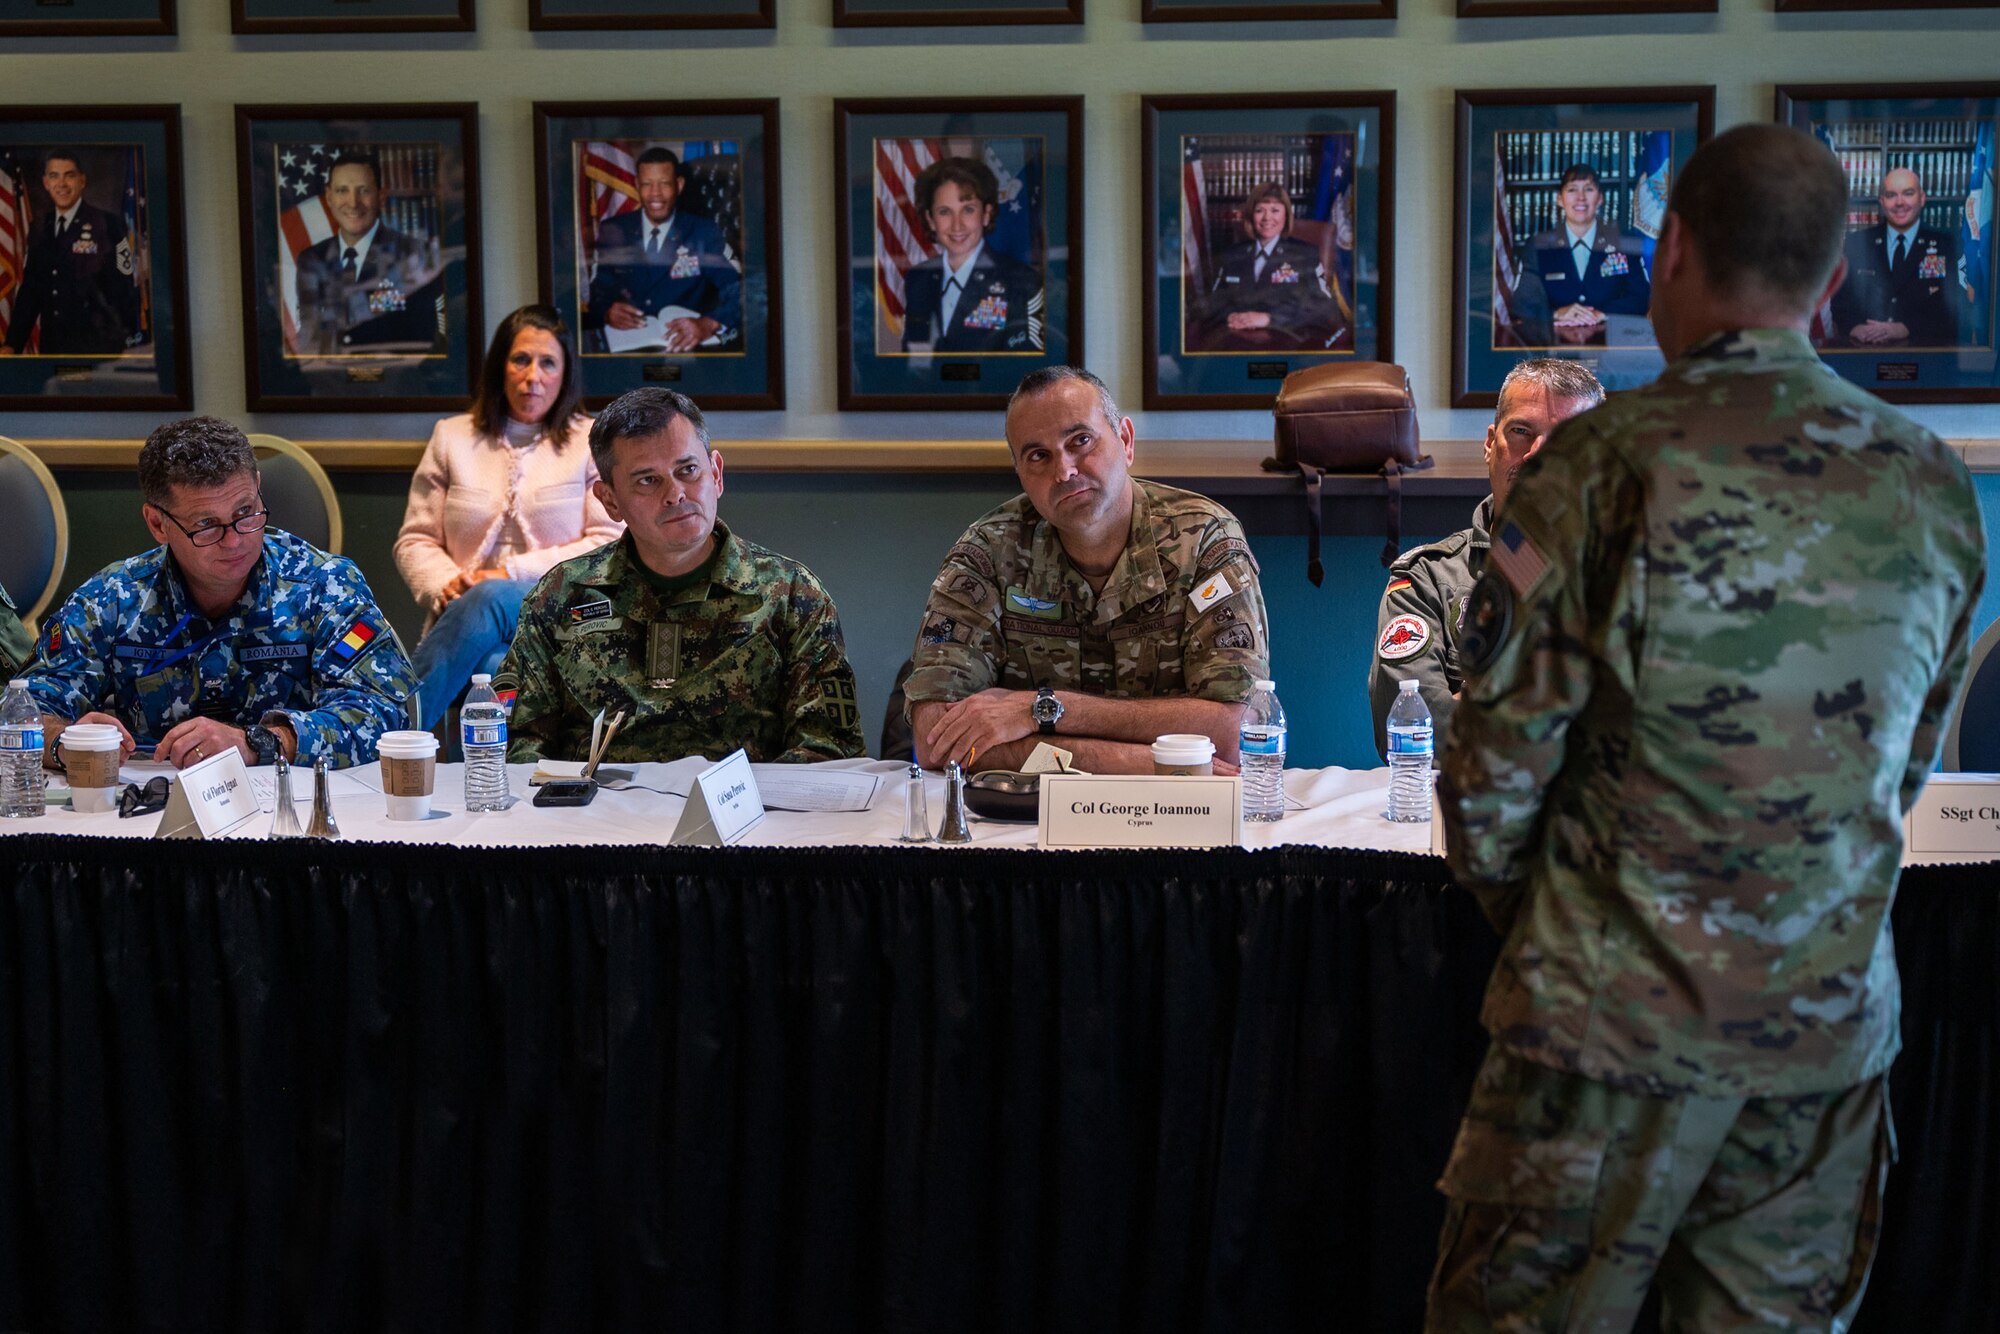 Senior ranking Foreign Air Attachés of a Secretary of the Air Force International Affairs (SAF/IA)-sponsored tour listen in during a Combined Force Space Component Command mission brief from U.S. Space Force Maj. Gen. Douglas A. Schiess, CFSCC commander, right, at Vandenberg Space Force Base, Calif., May 3, 2023. Hosted by CFSCC, the group consisted of 15 Foreign Air Attachés, all from different countries, who participated in space-related discussions. (U.S. Space Force photo by Tech. Sgt. Luke Kitterman)